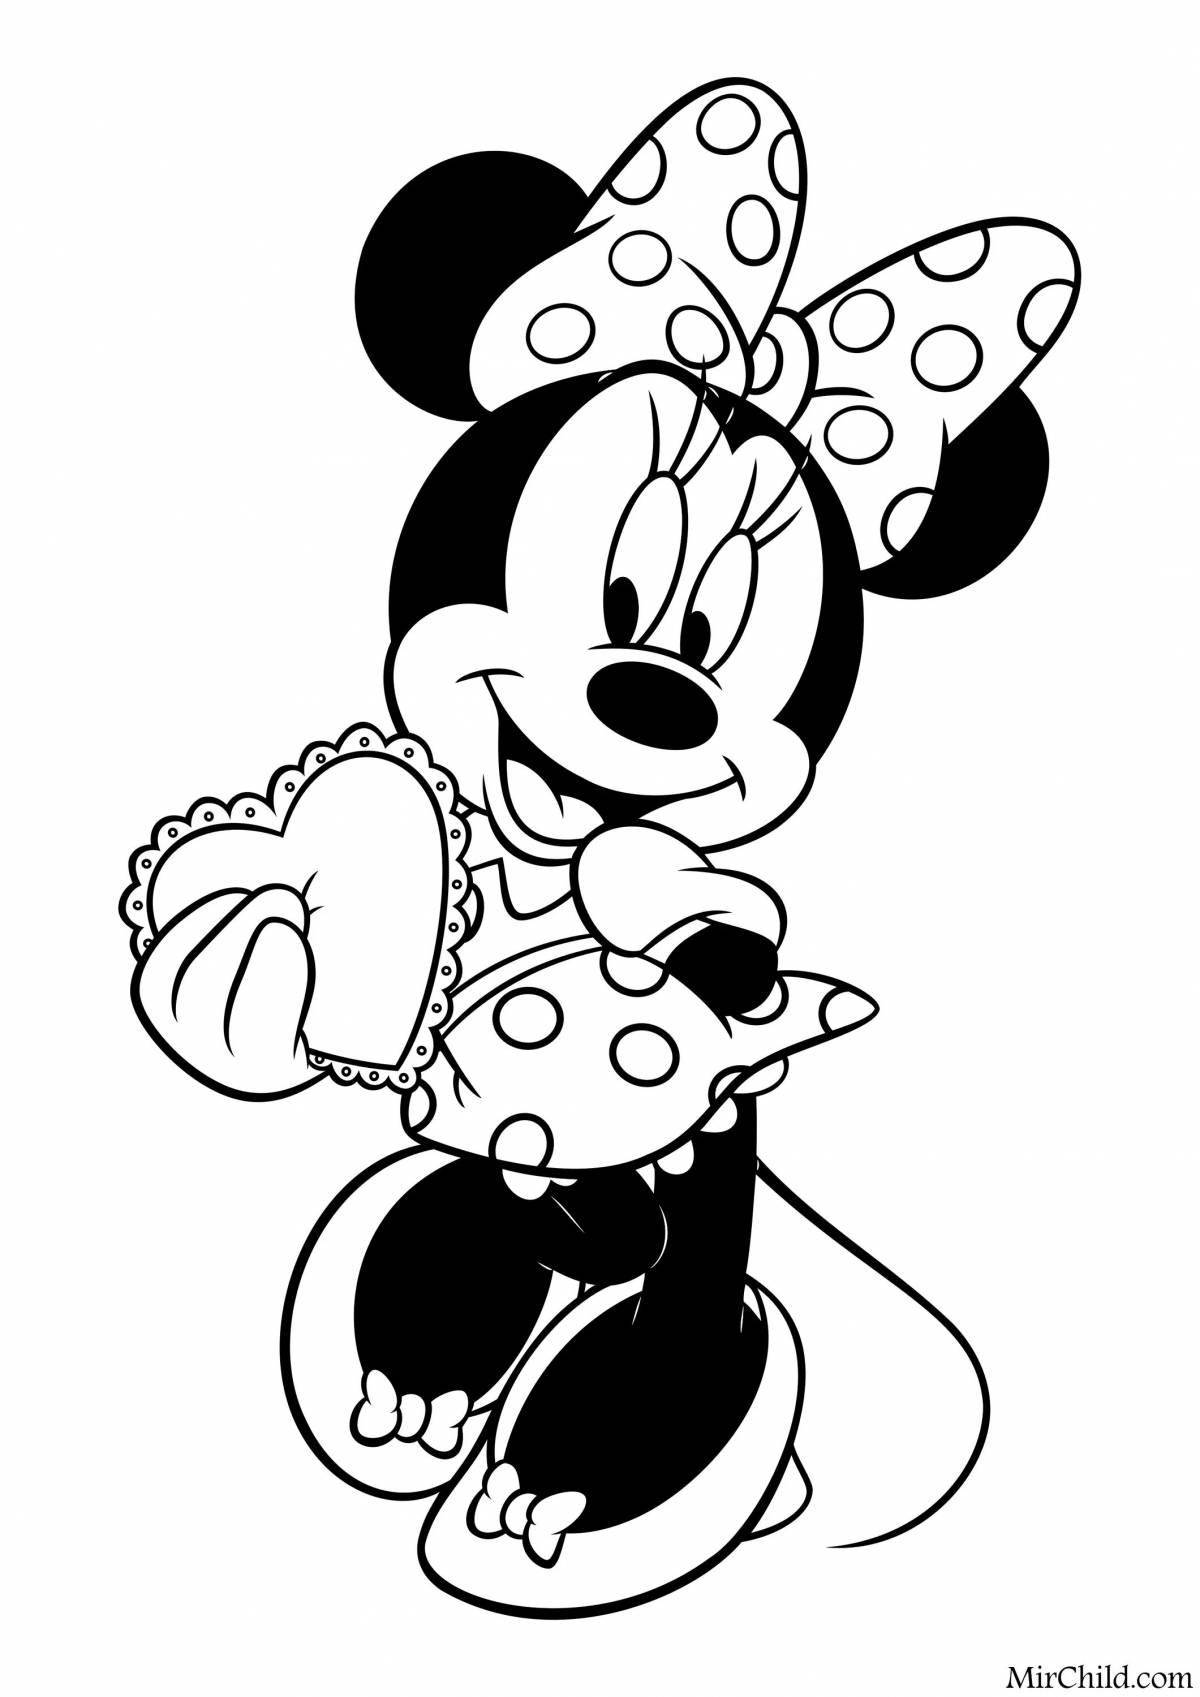 Minnie mouse luminous coloring book for kids